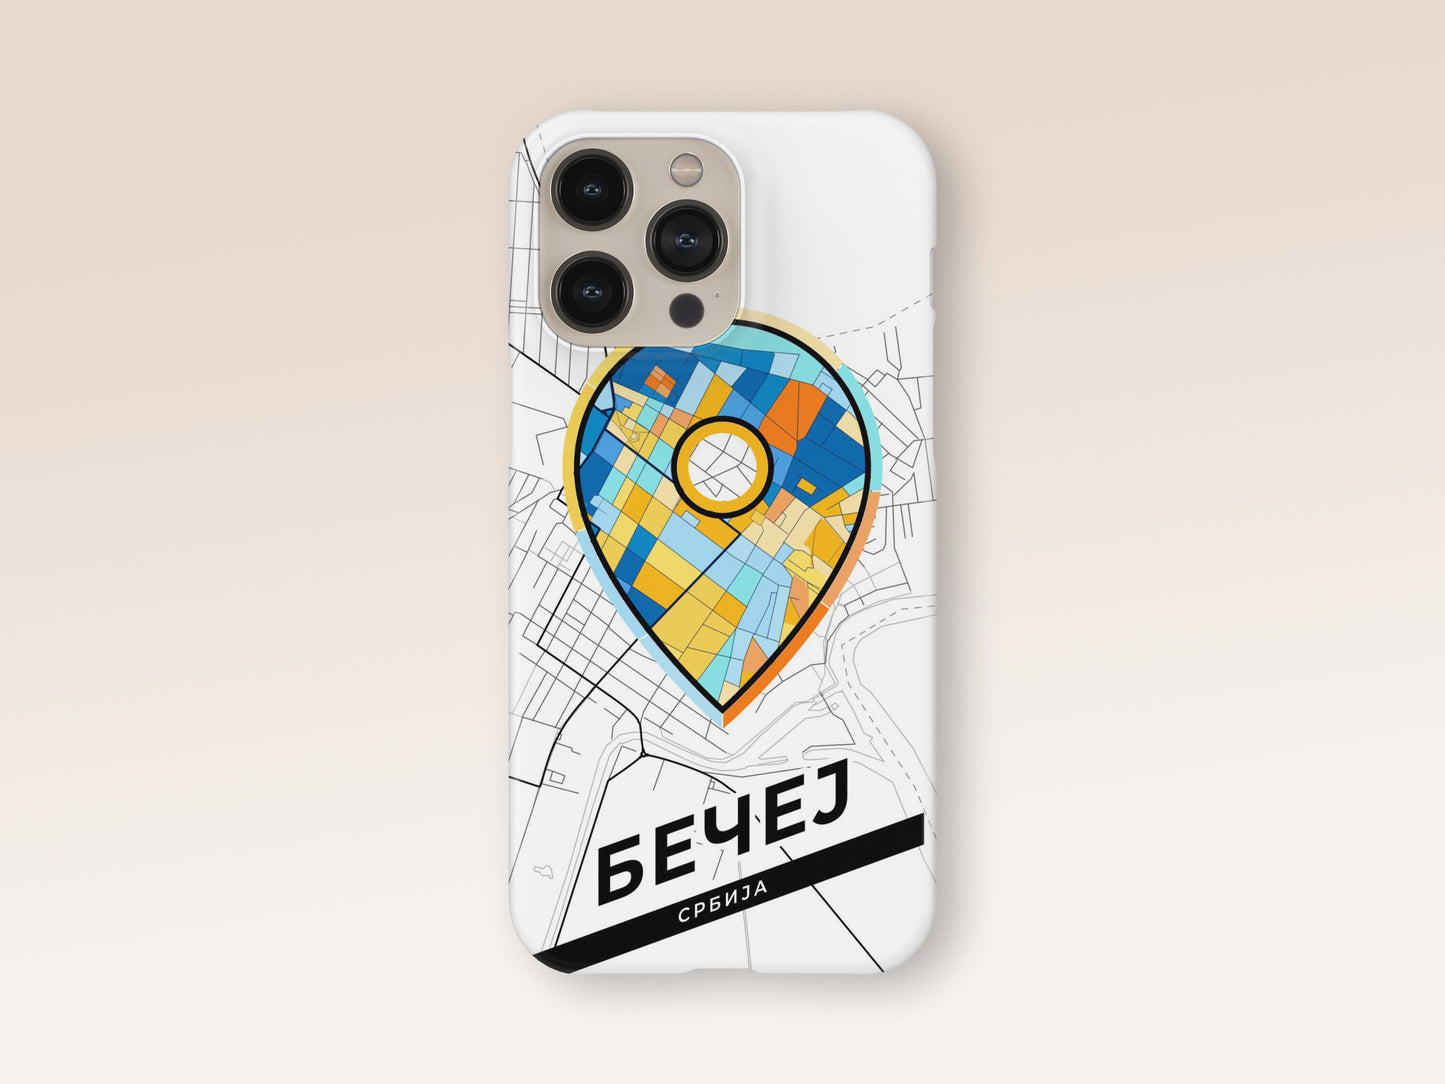 Bečej Serbia slim phone case with colorful icon. Birthday, wedding or housewarming gift. Couple match cases. 1